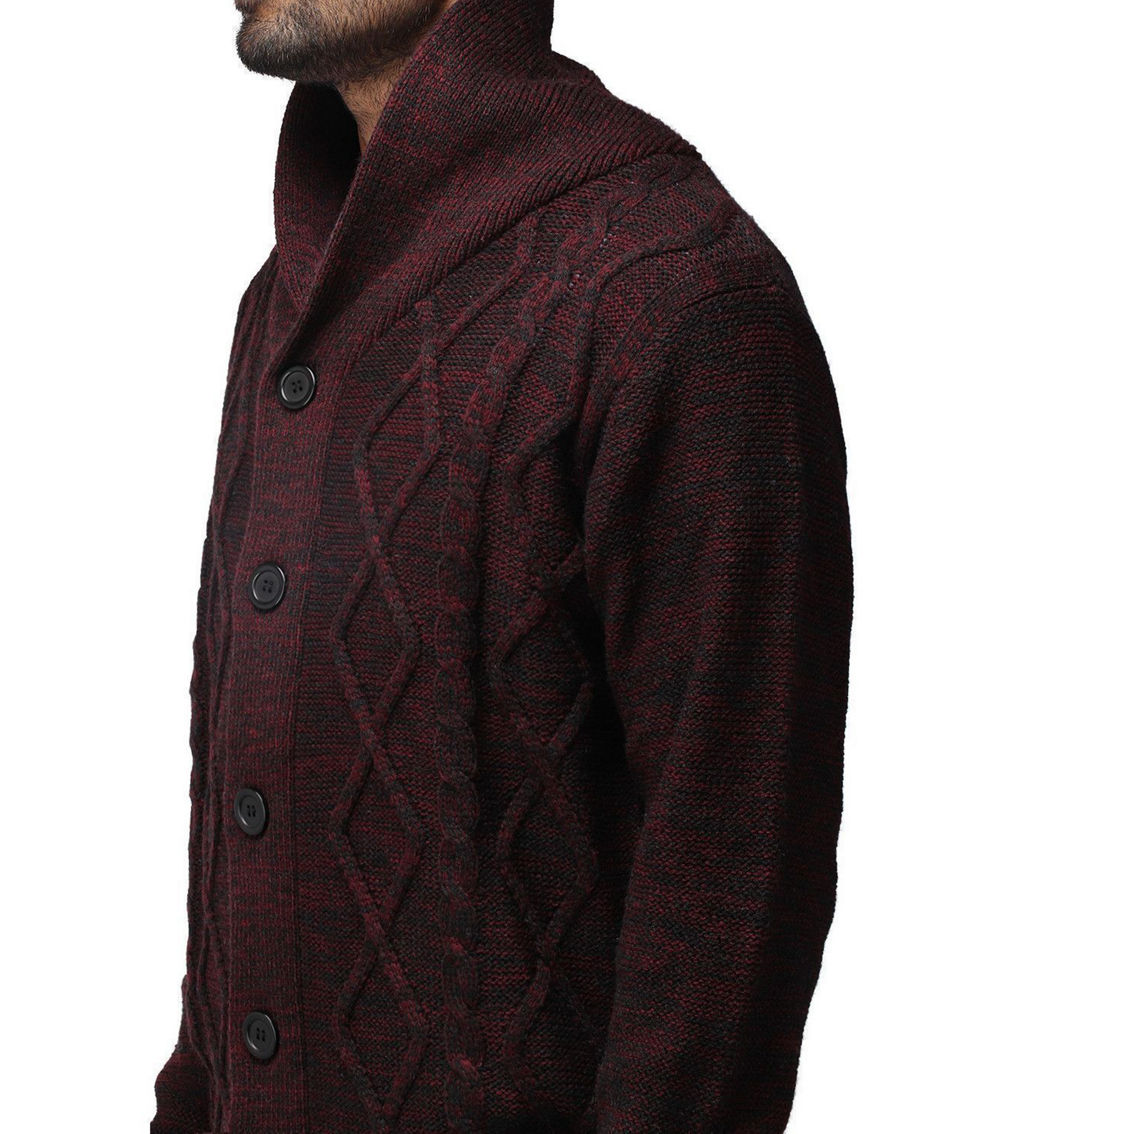 Men's Shawl Collar Cable Knit Cardigan - Image 3 of 3